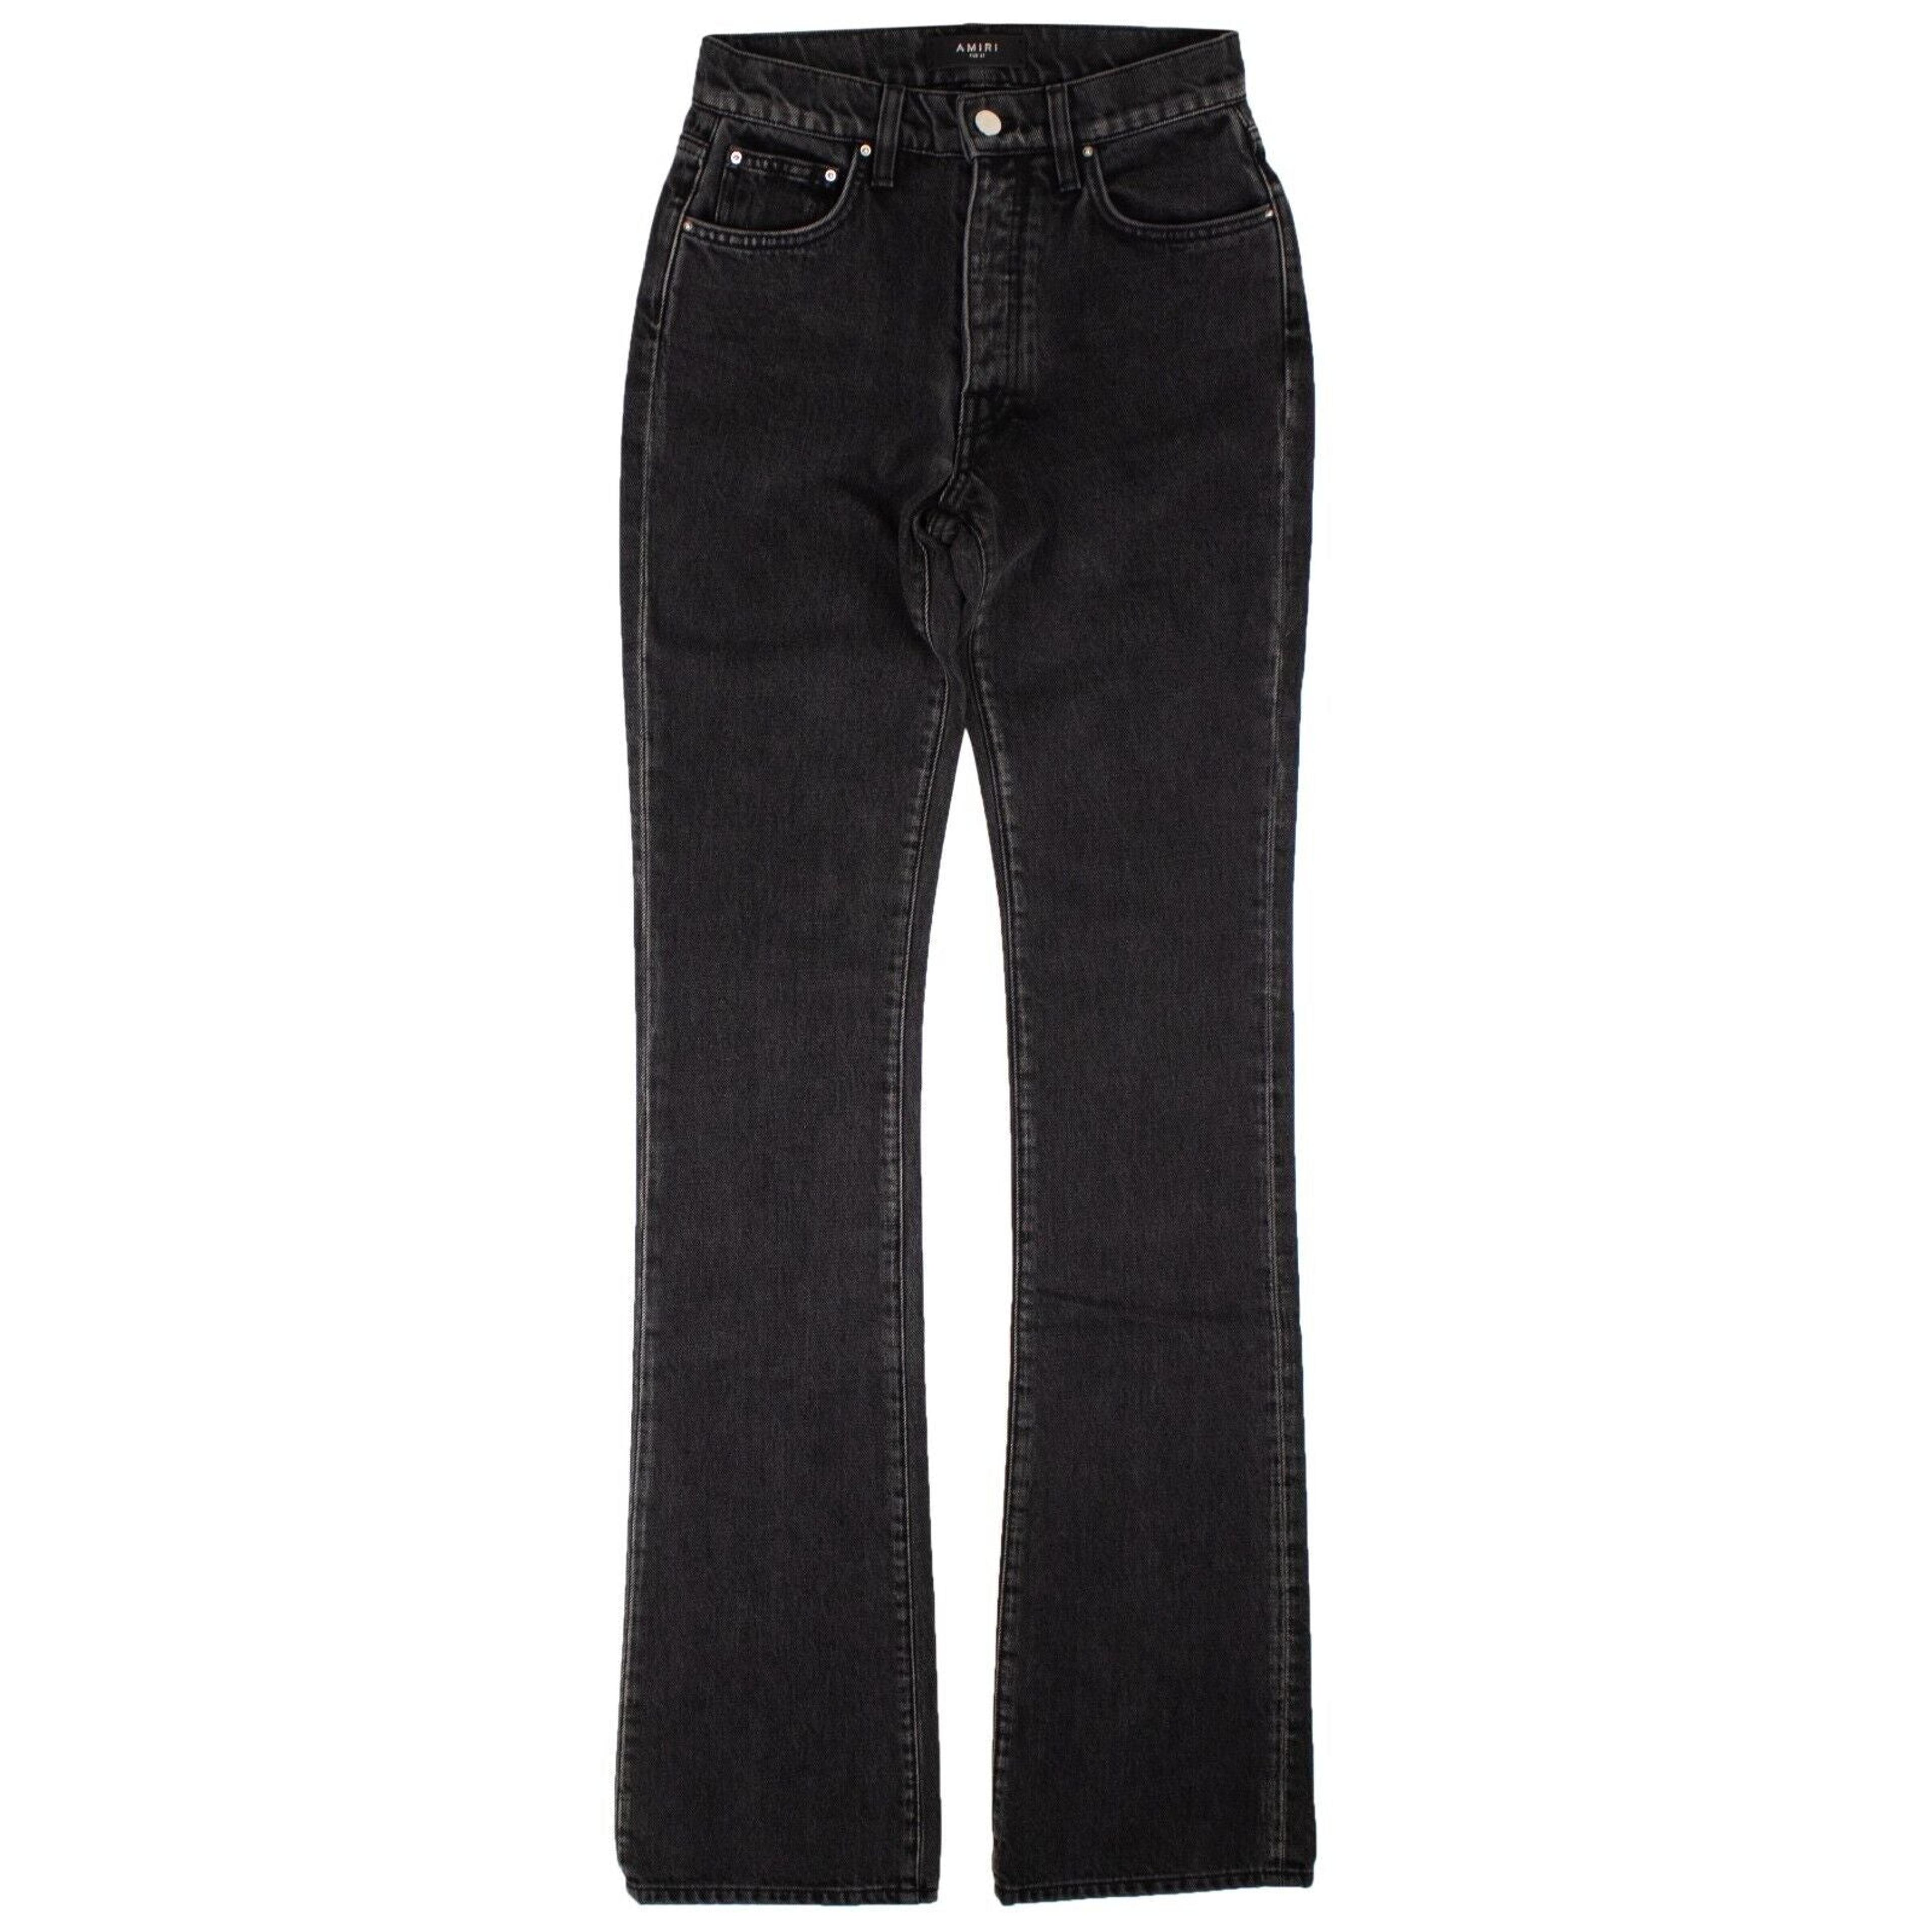 Alternate View 1 of Black Long Stretch Flare Jeans